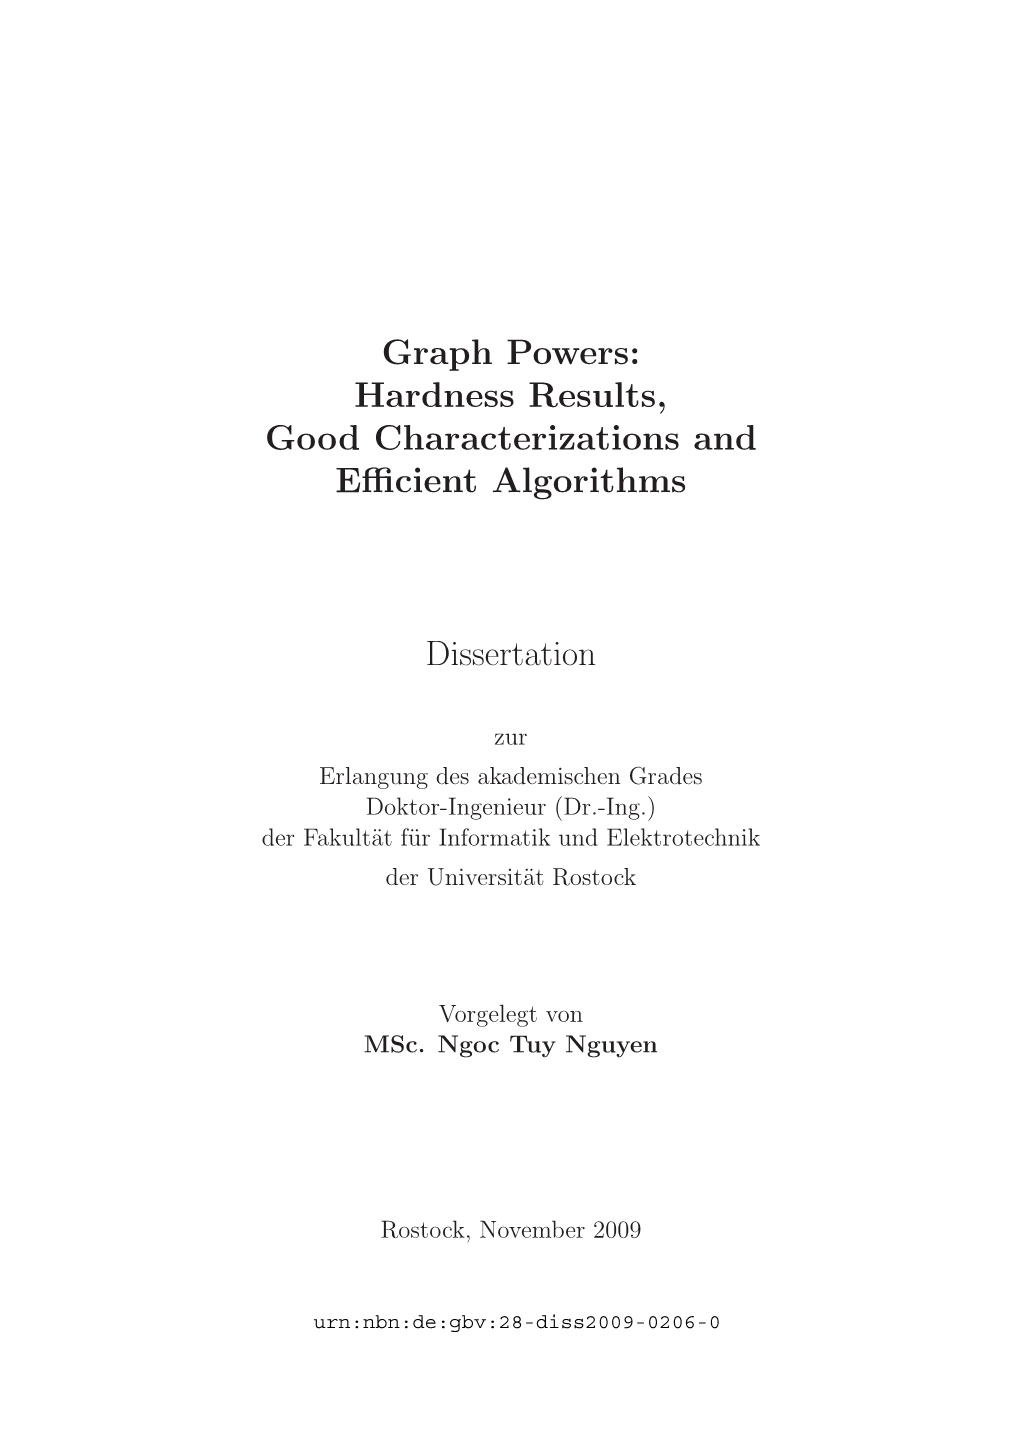 Graph Powers: Hardness Results, Good Characterizations and Eﬃcient Algorithms